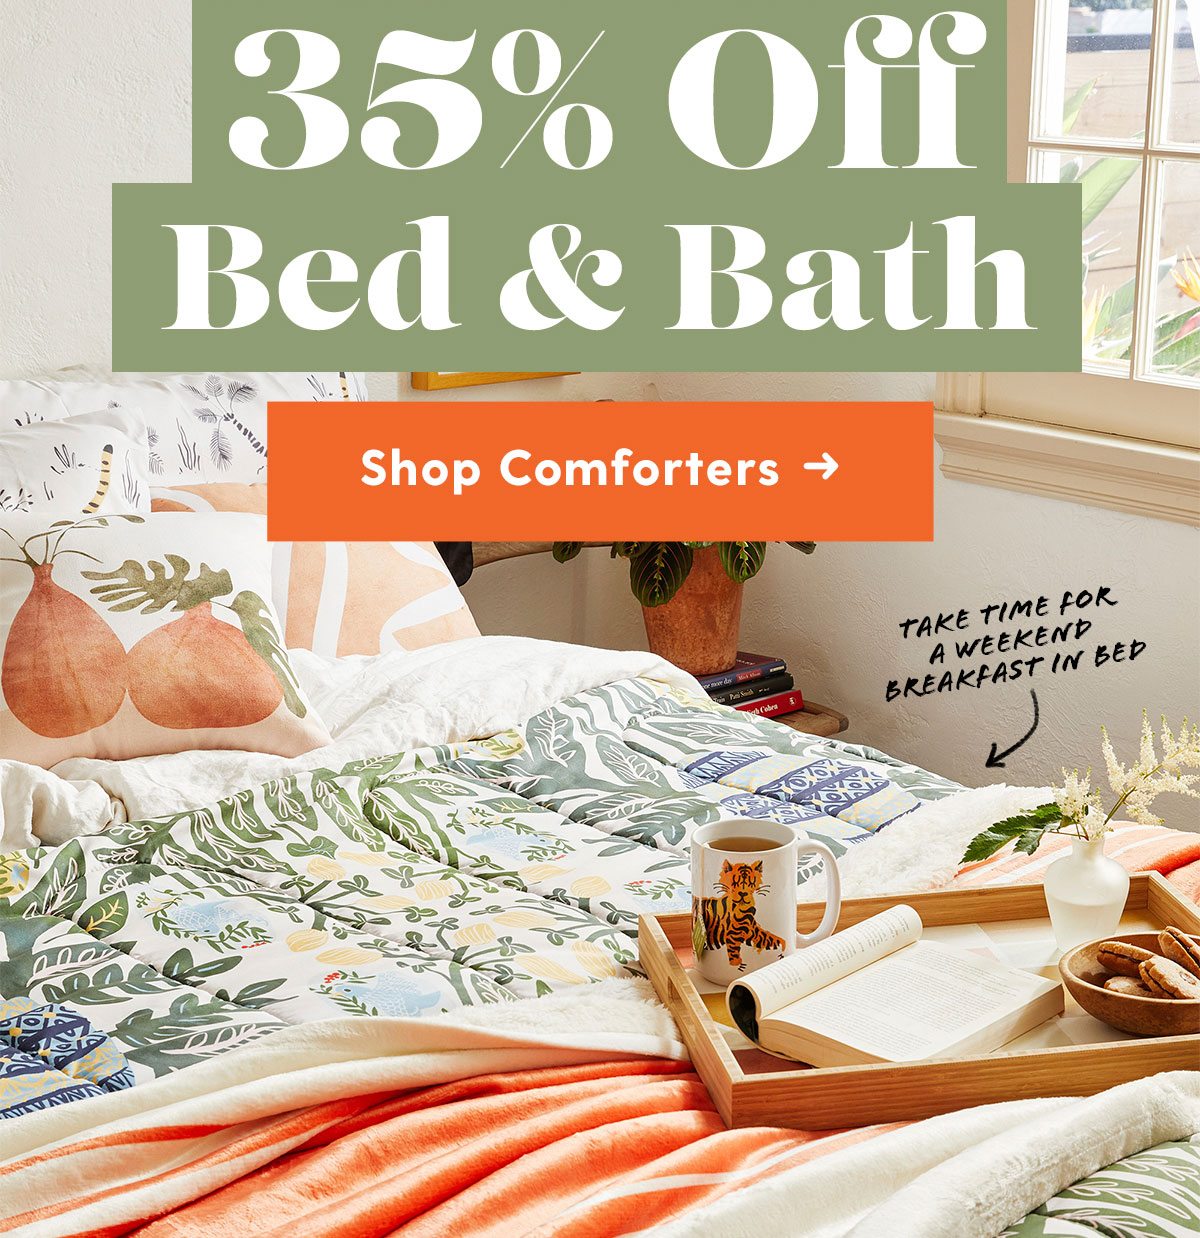 35% Off Bed & Bath. Take time for a weekend breakfast in bed. Shop Comforters →